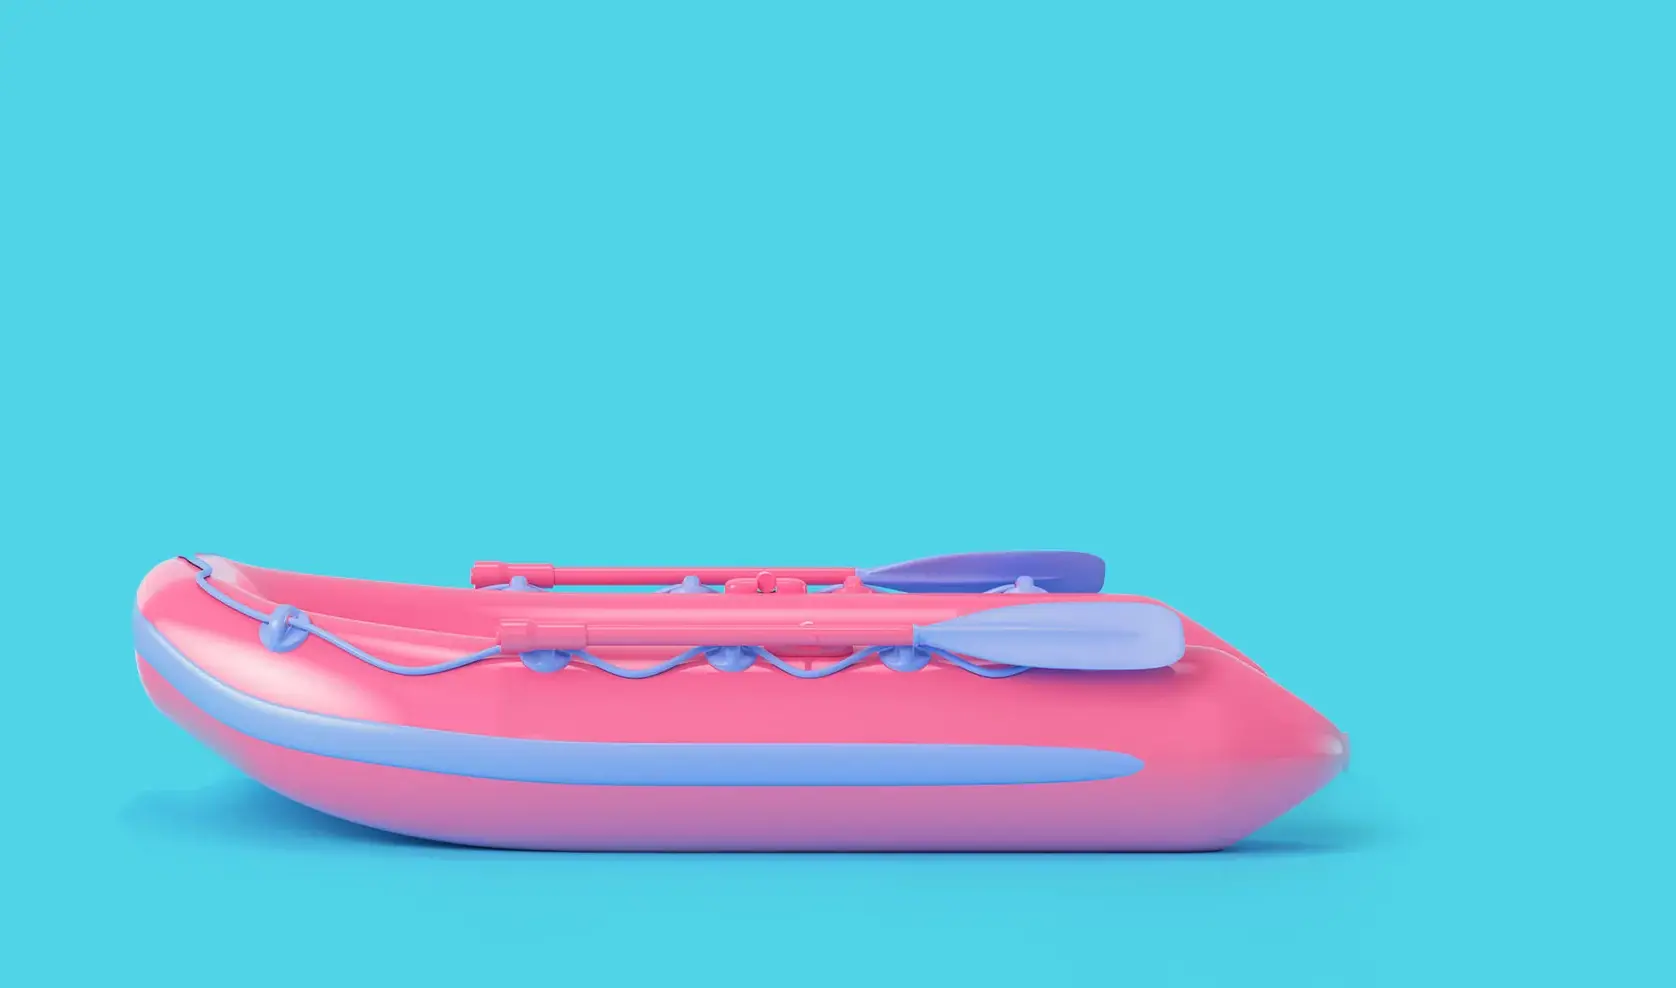 Inflatable pink boat on blue background.